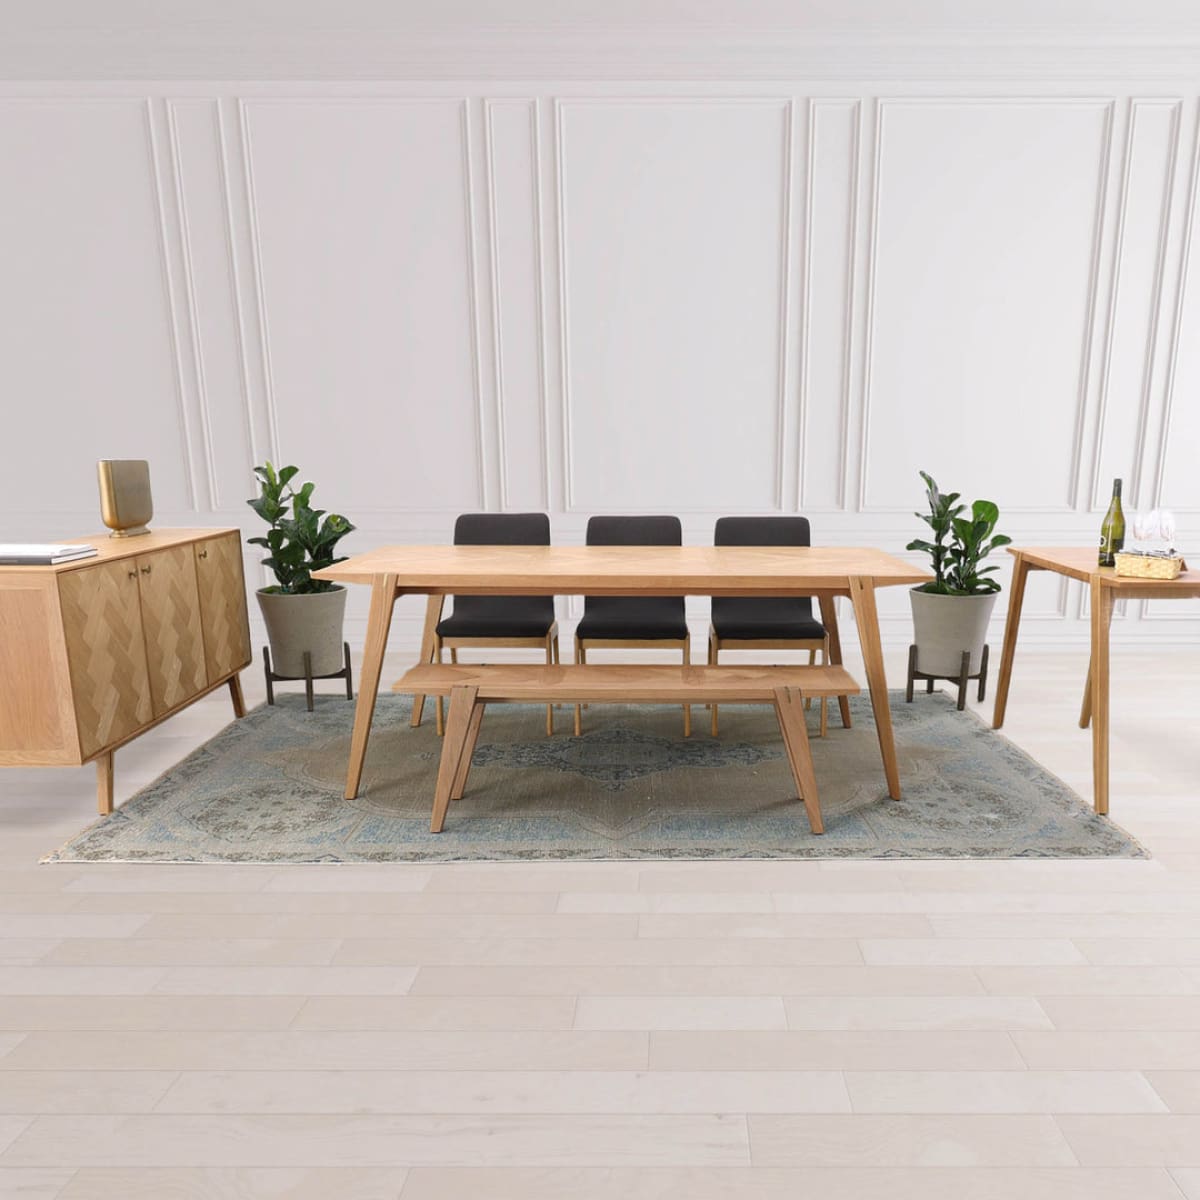 Colton Console Table - lh-import-console-tables